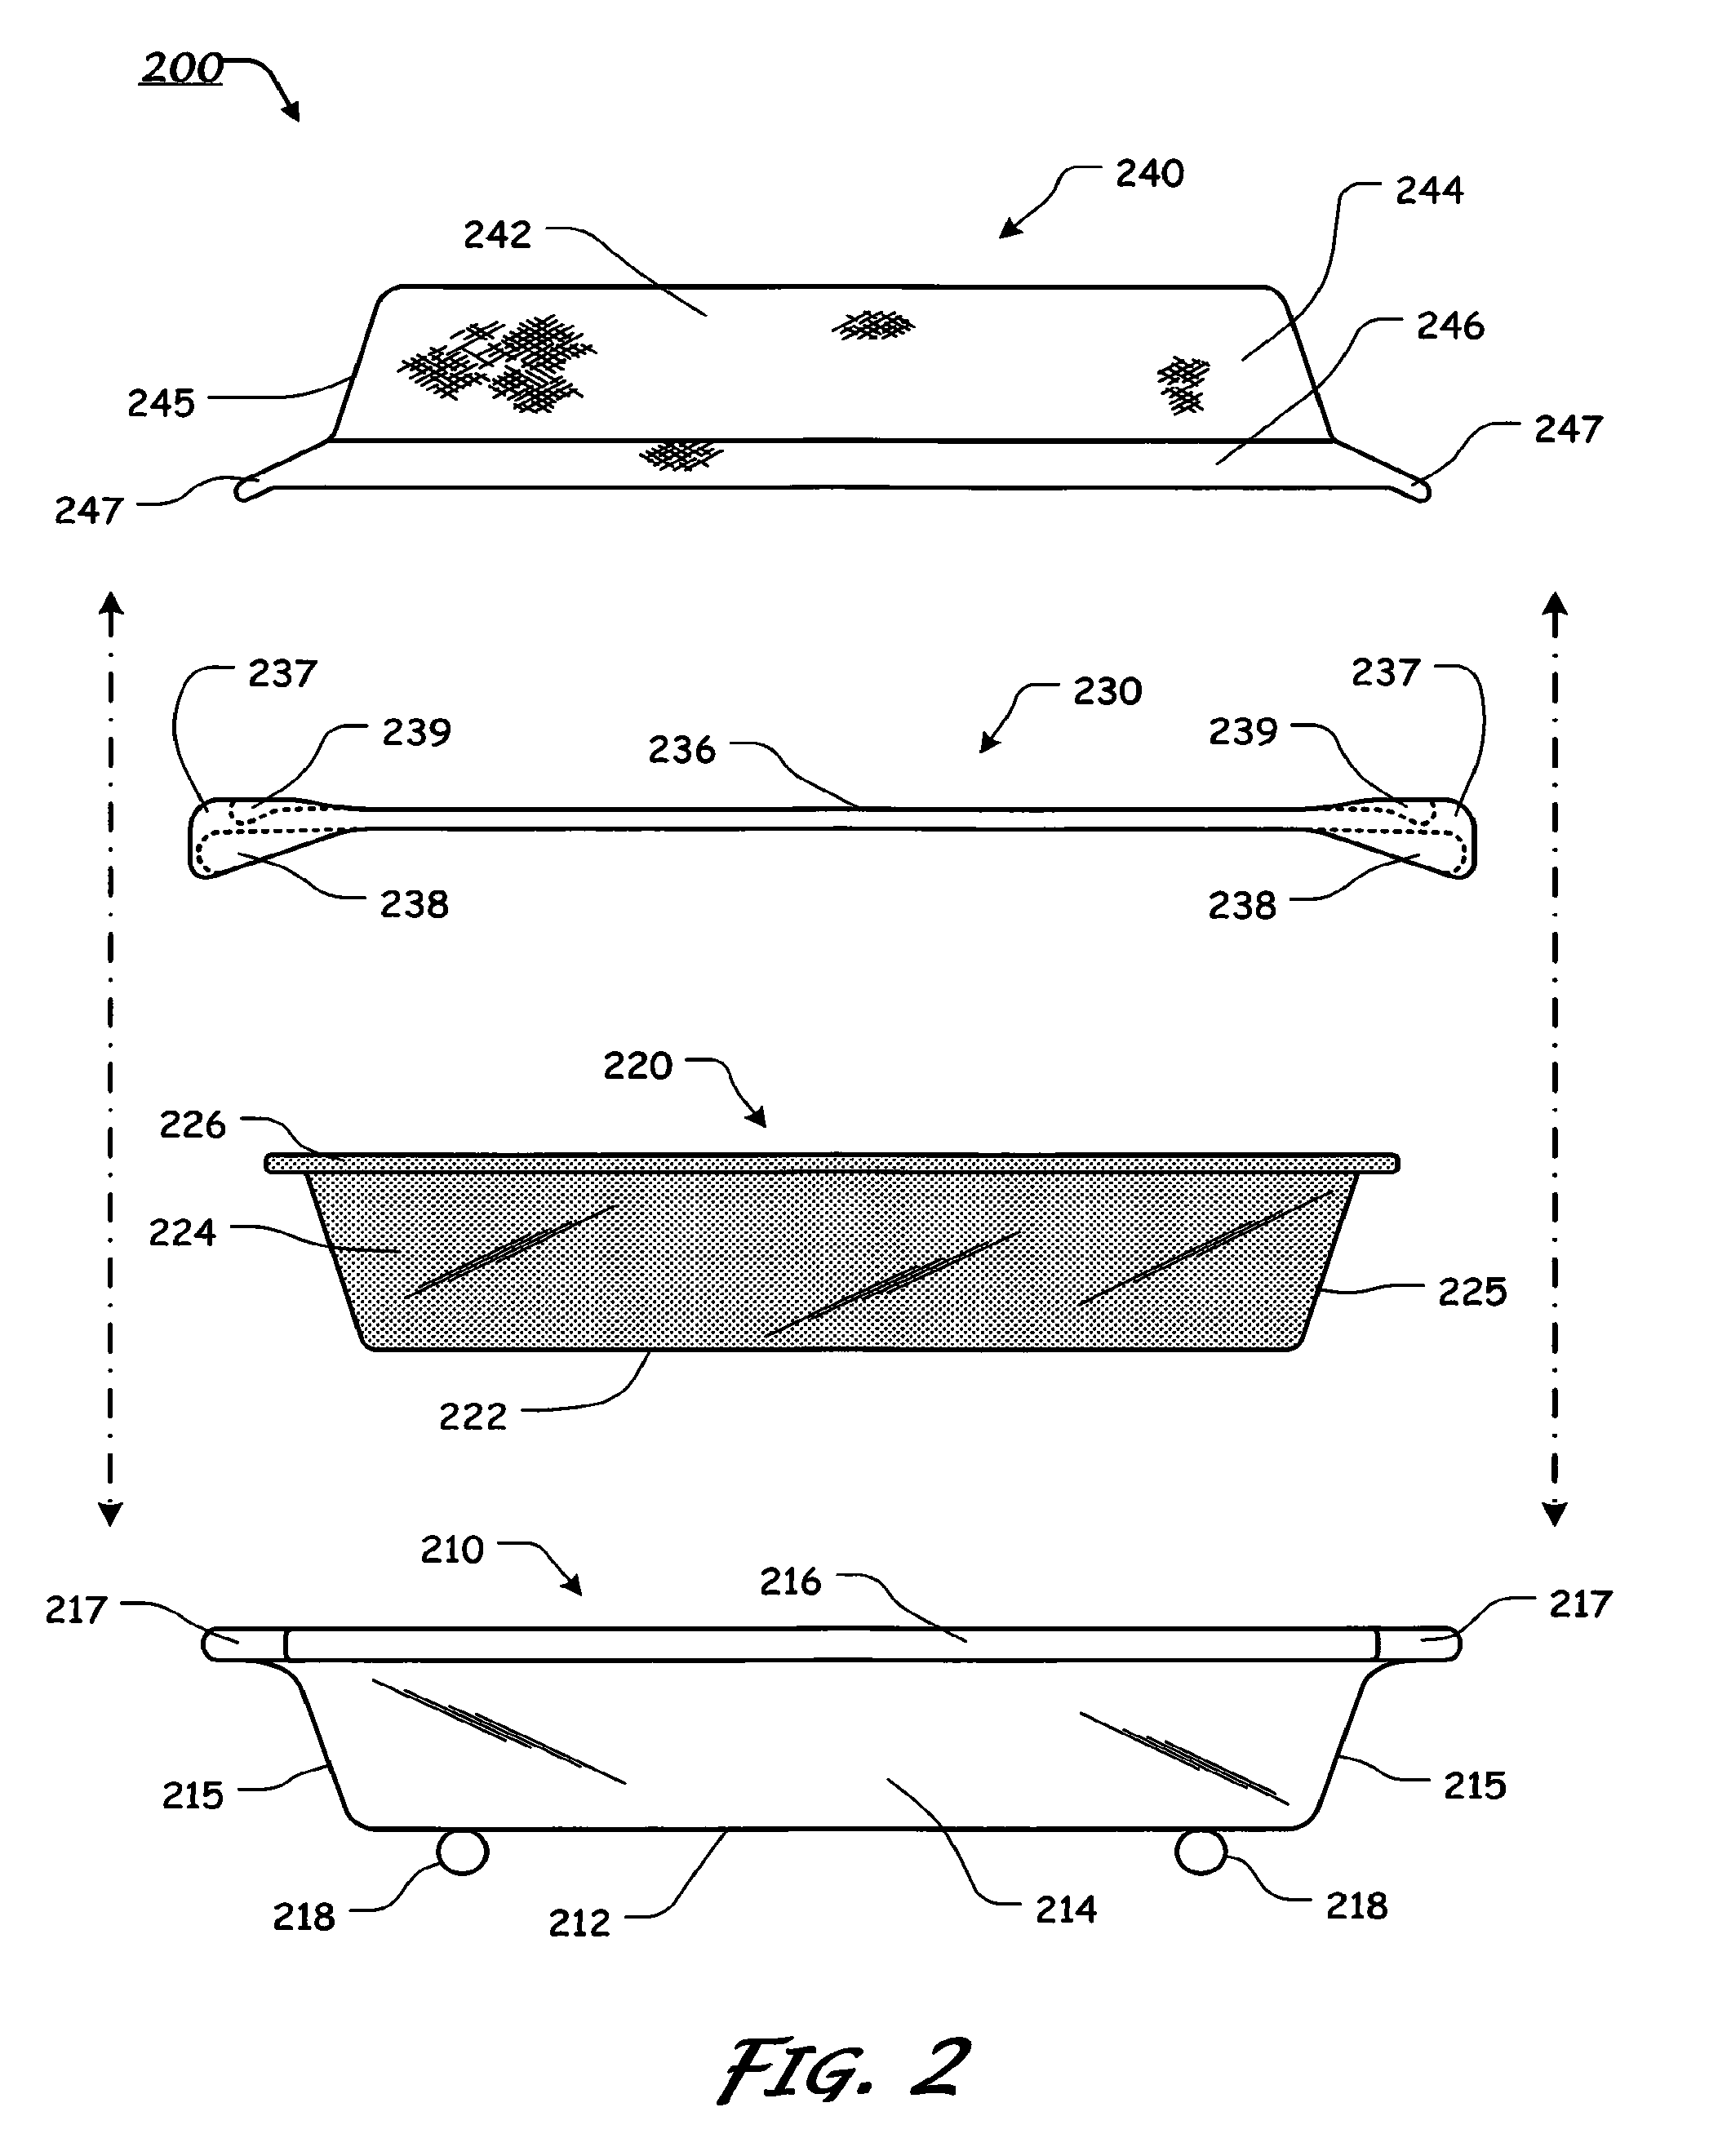 Decorative serving container system